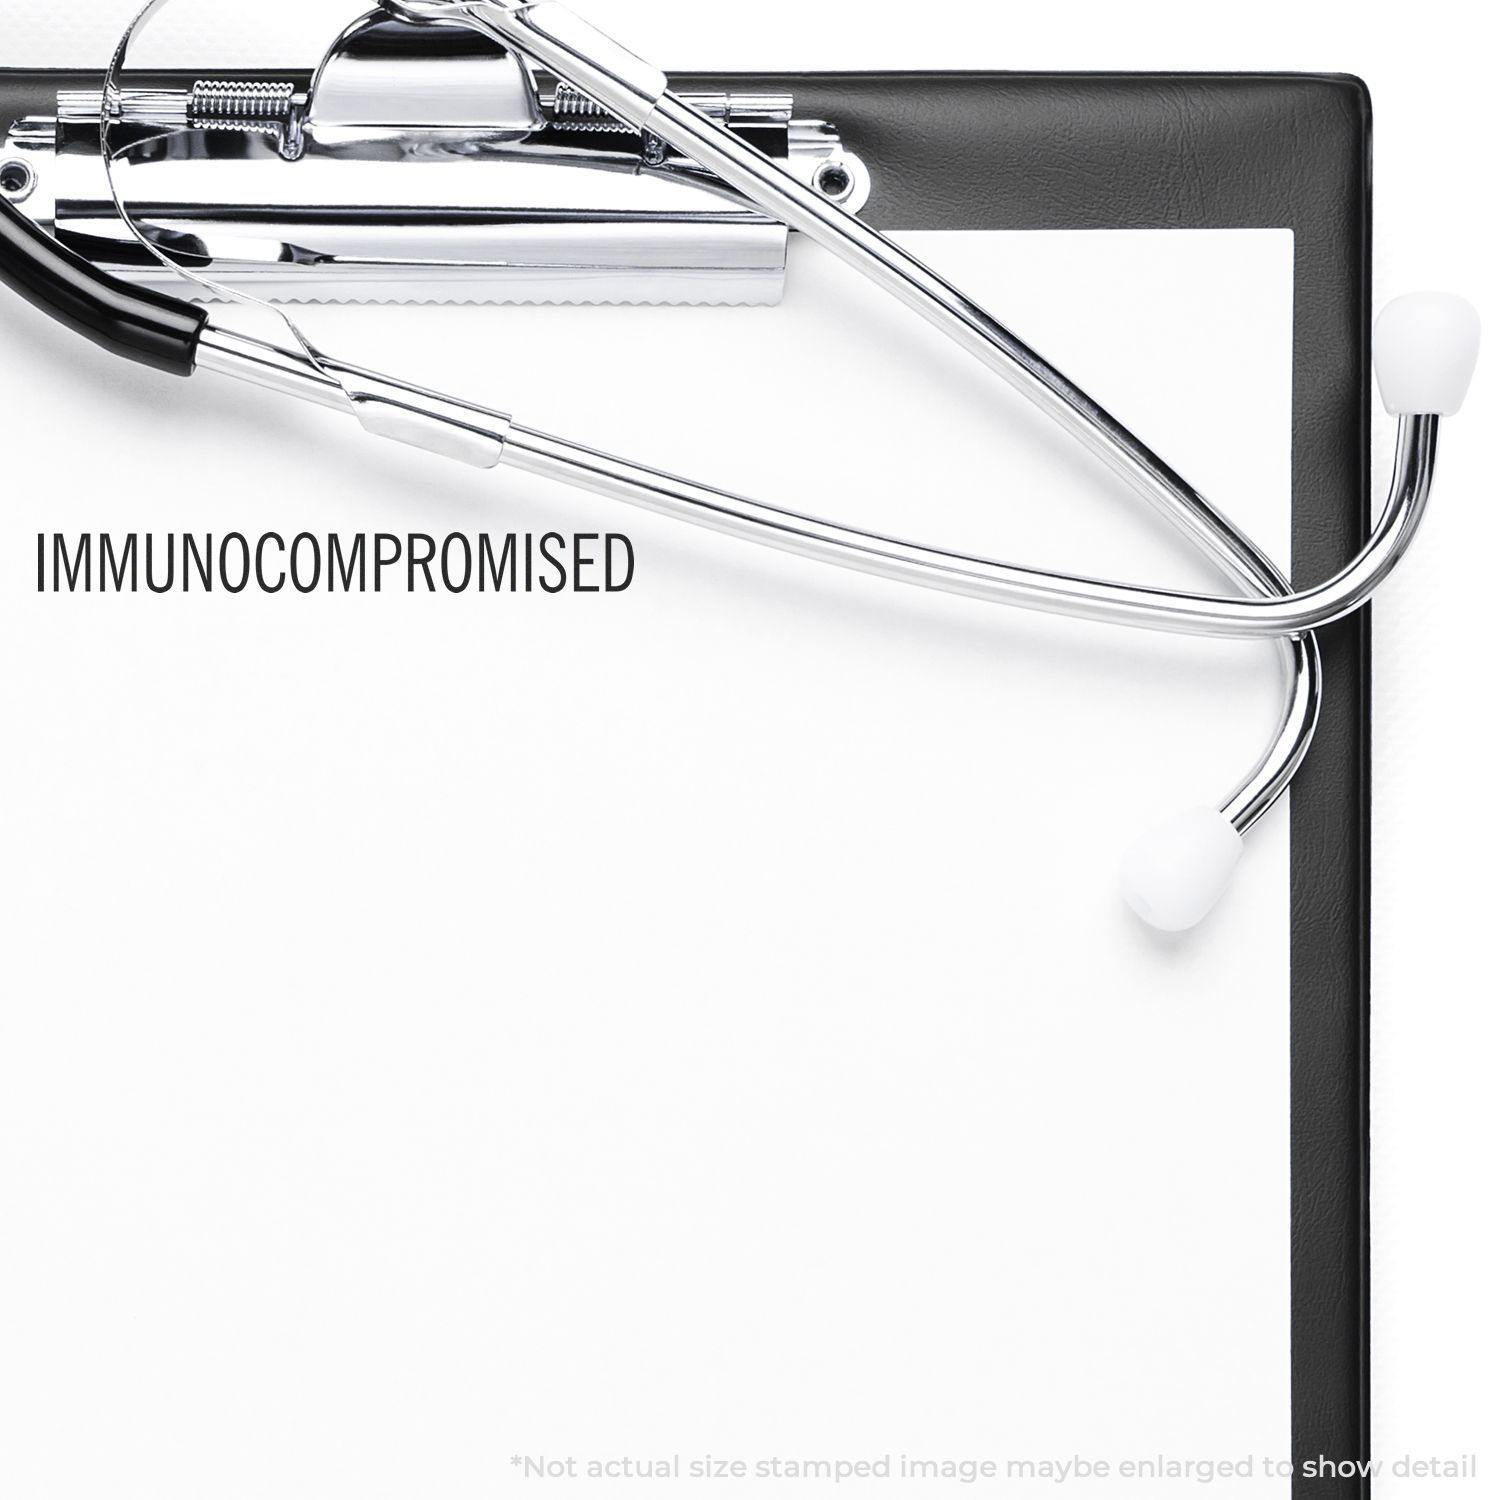 In Use Large Pre-Inked Immunocompromised Stamp Image